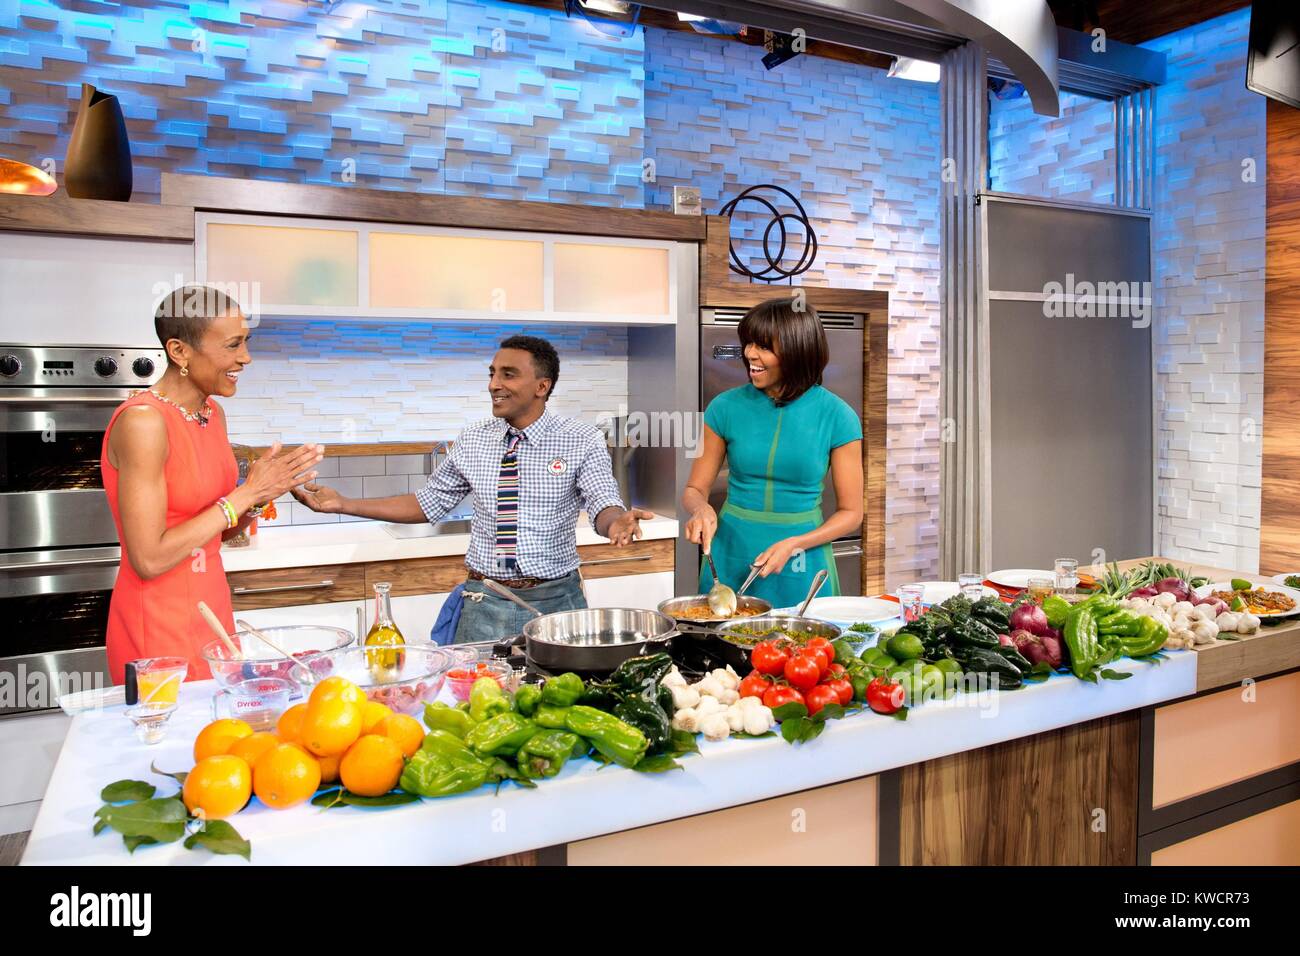 First Lady Michelle Obama, 'Good Morning America' anchor Robin Roberts, and chef Marcus Samuelsson. They were promoting healthy cooking with vegetables. Feb. 22, 2013. (BSLOC 2015 3 105) Stock Photo